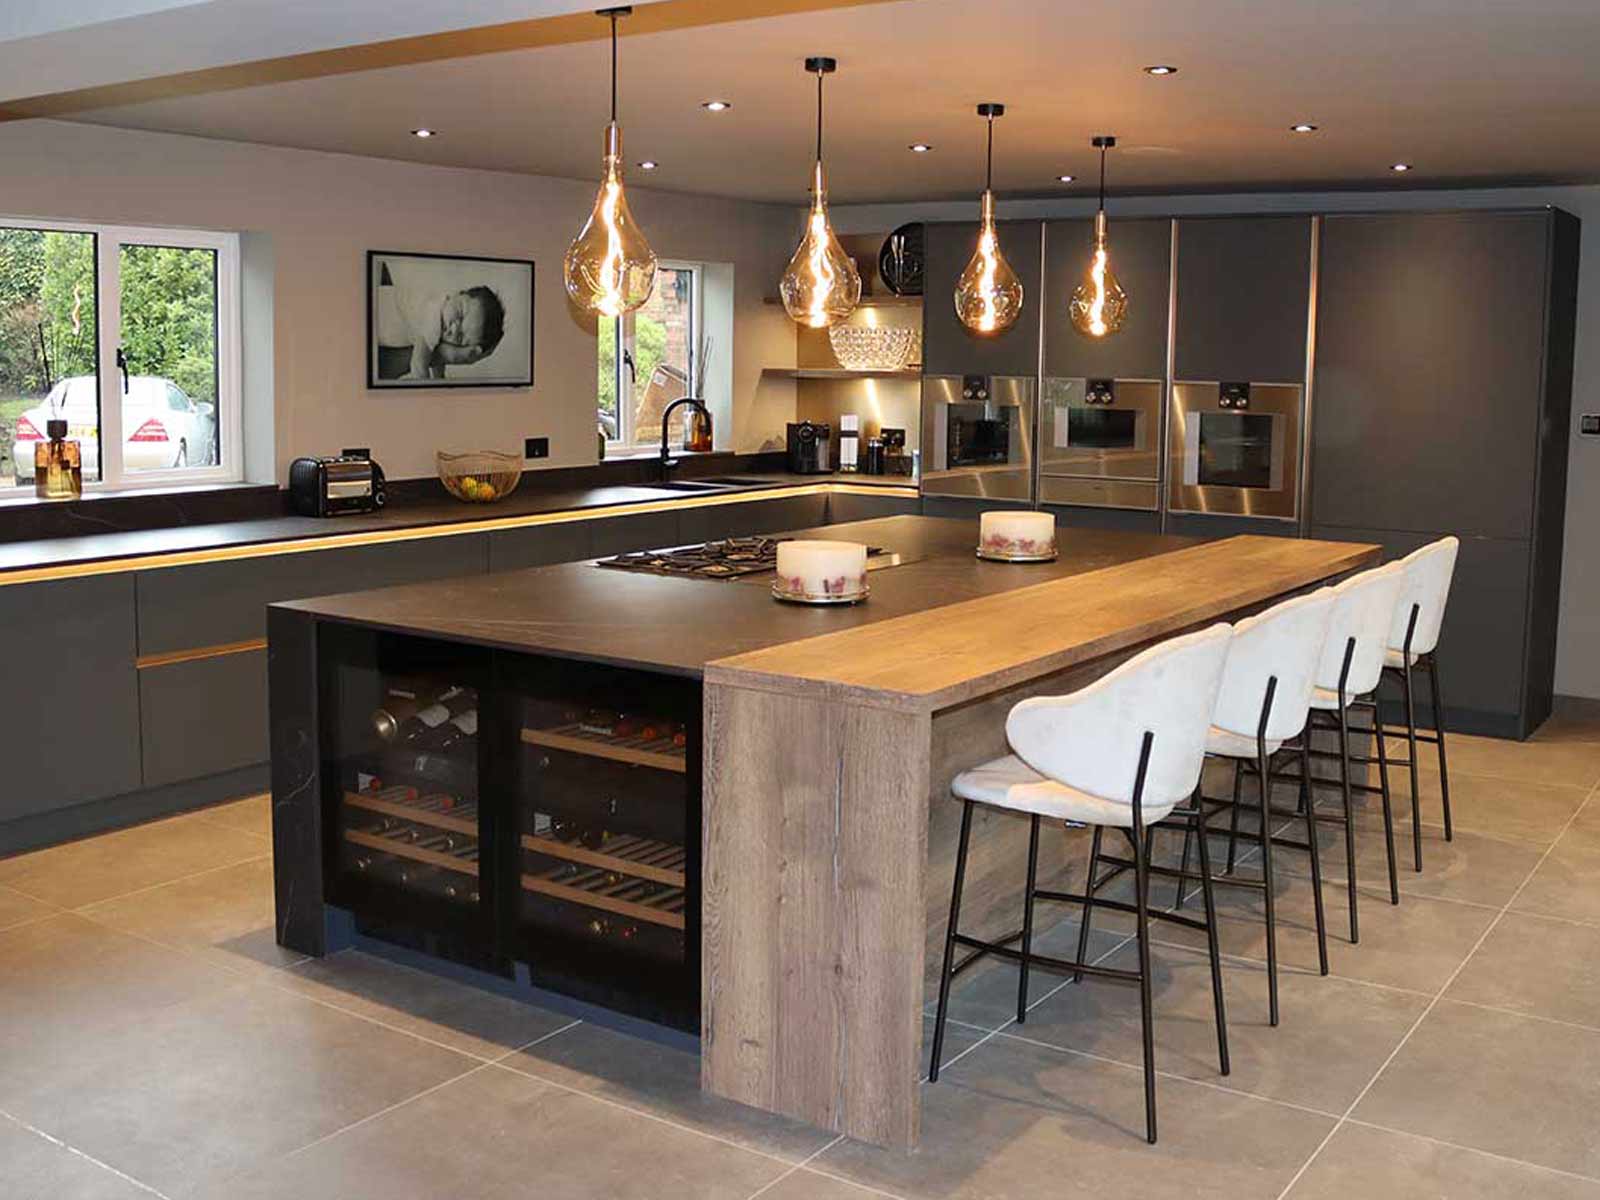 Grey kitchen with a kitchen island and bar stools